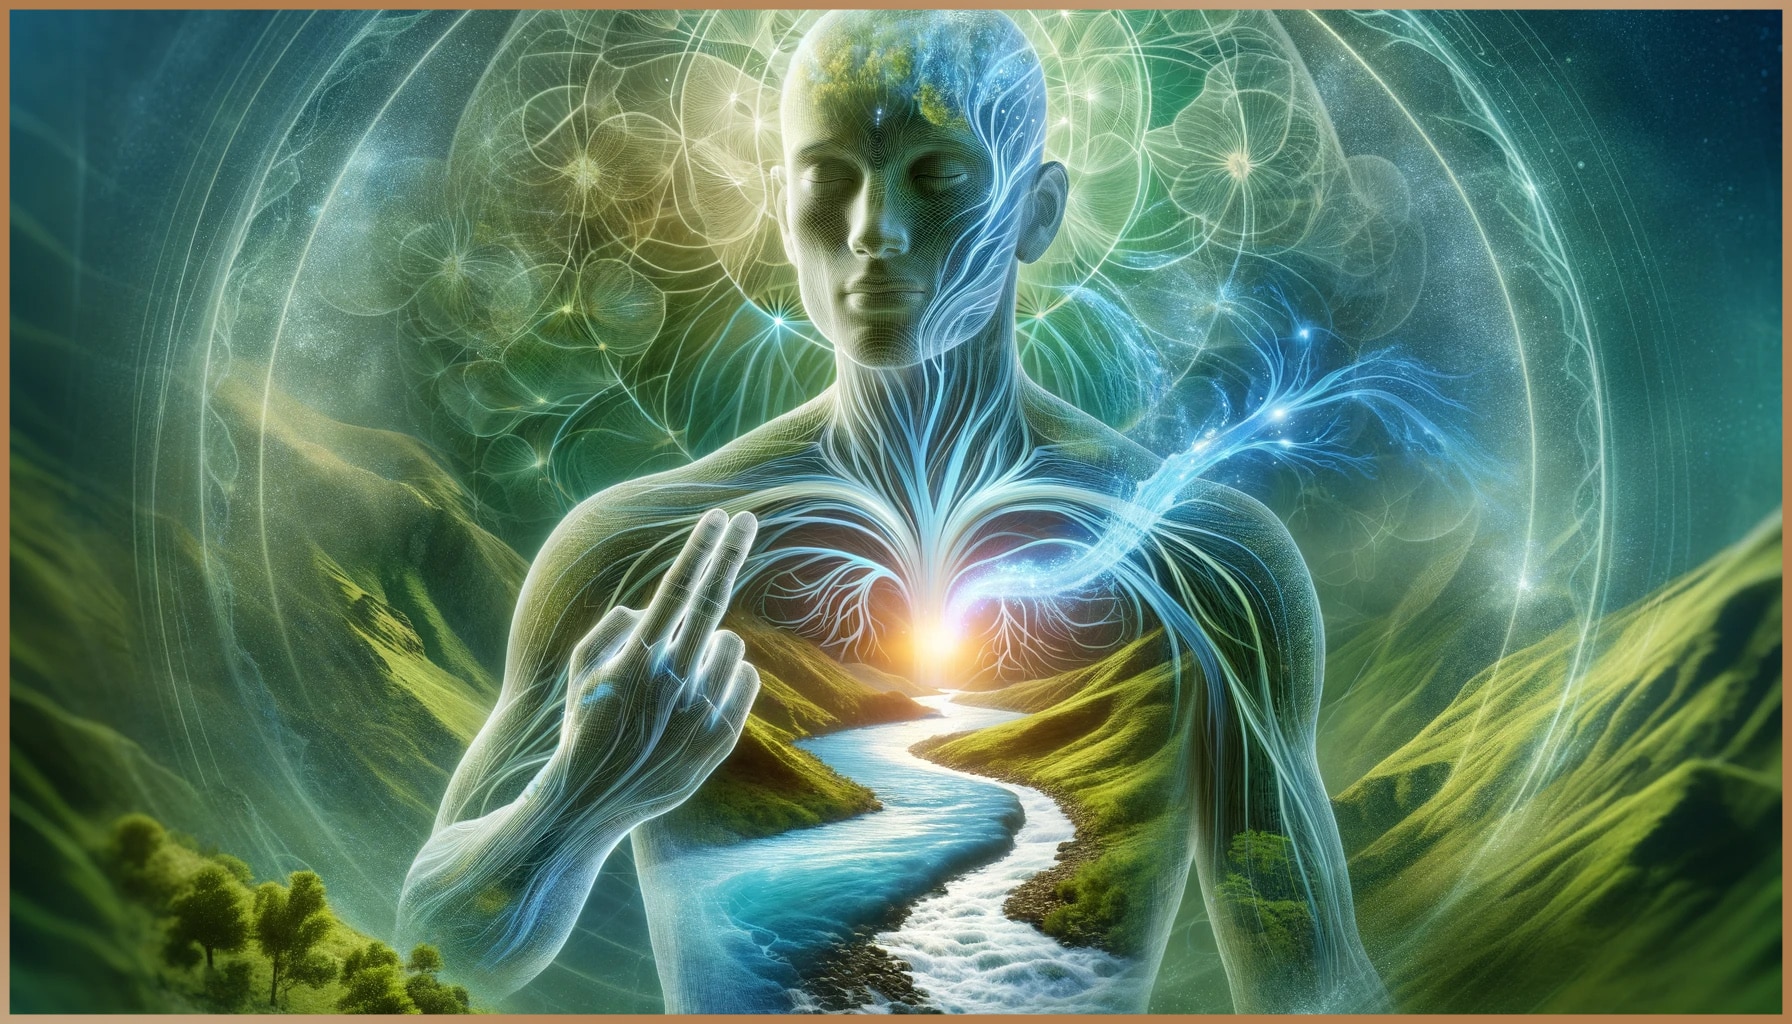 Illustration of a meditative figure with rivers and light symbolizing life energy flowing through the body.